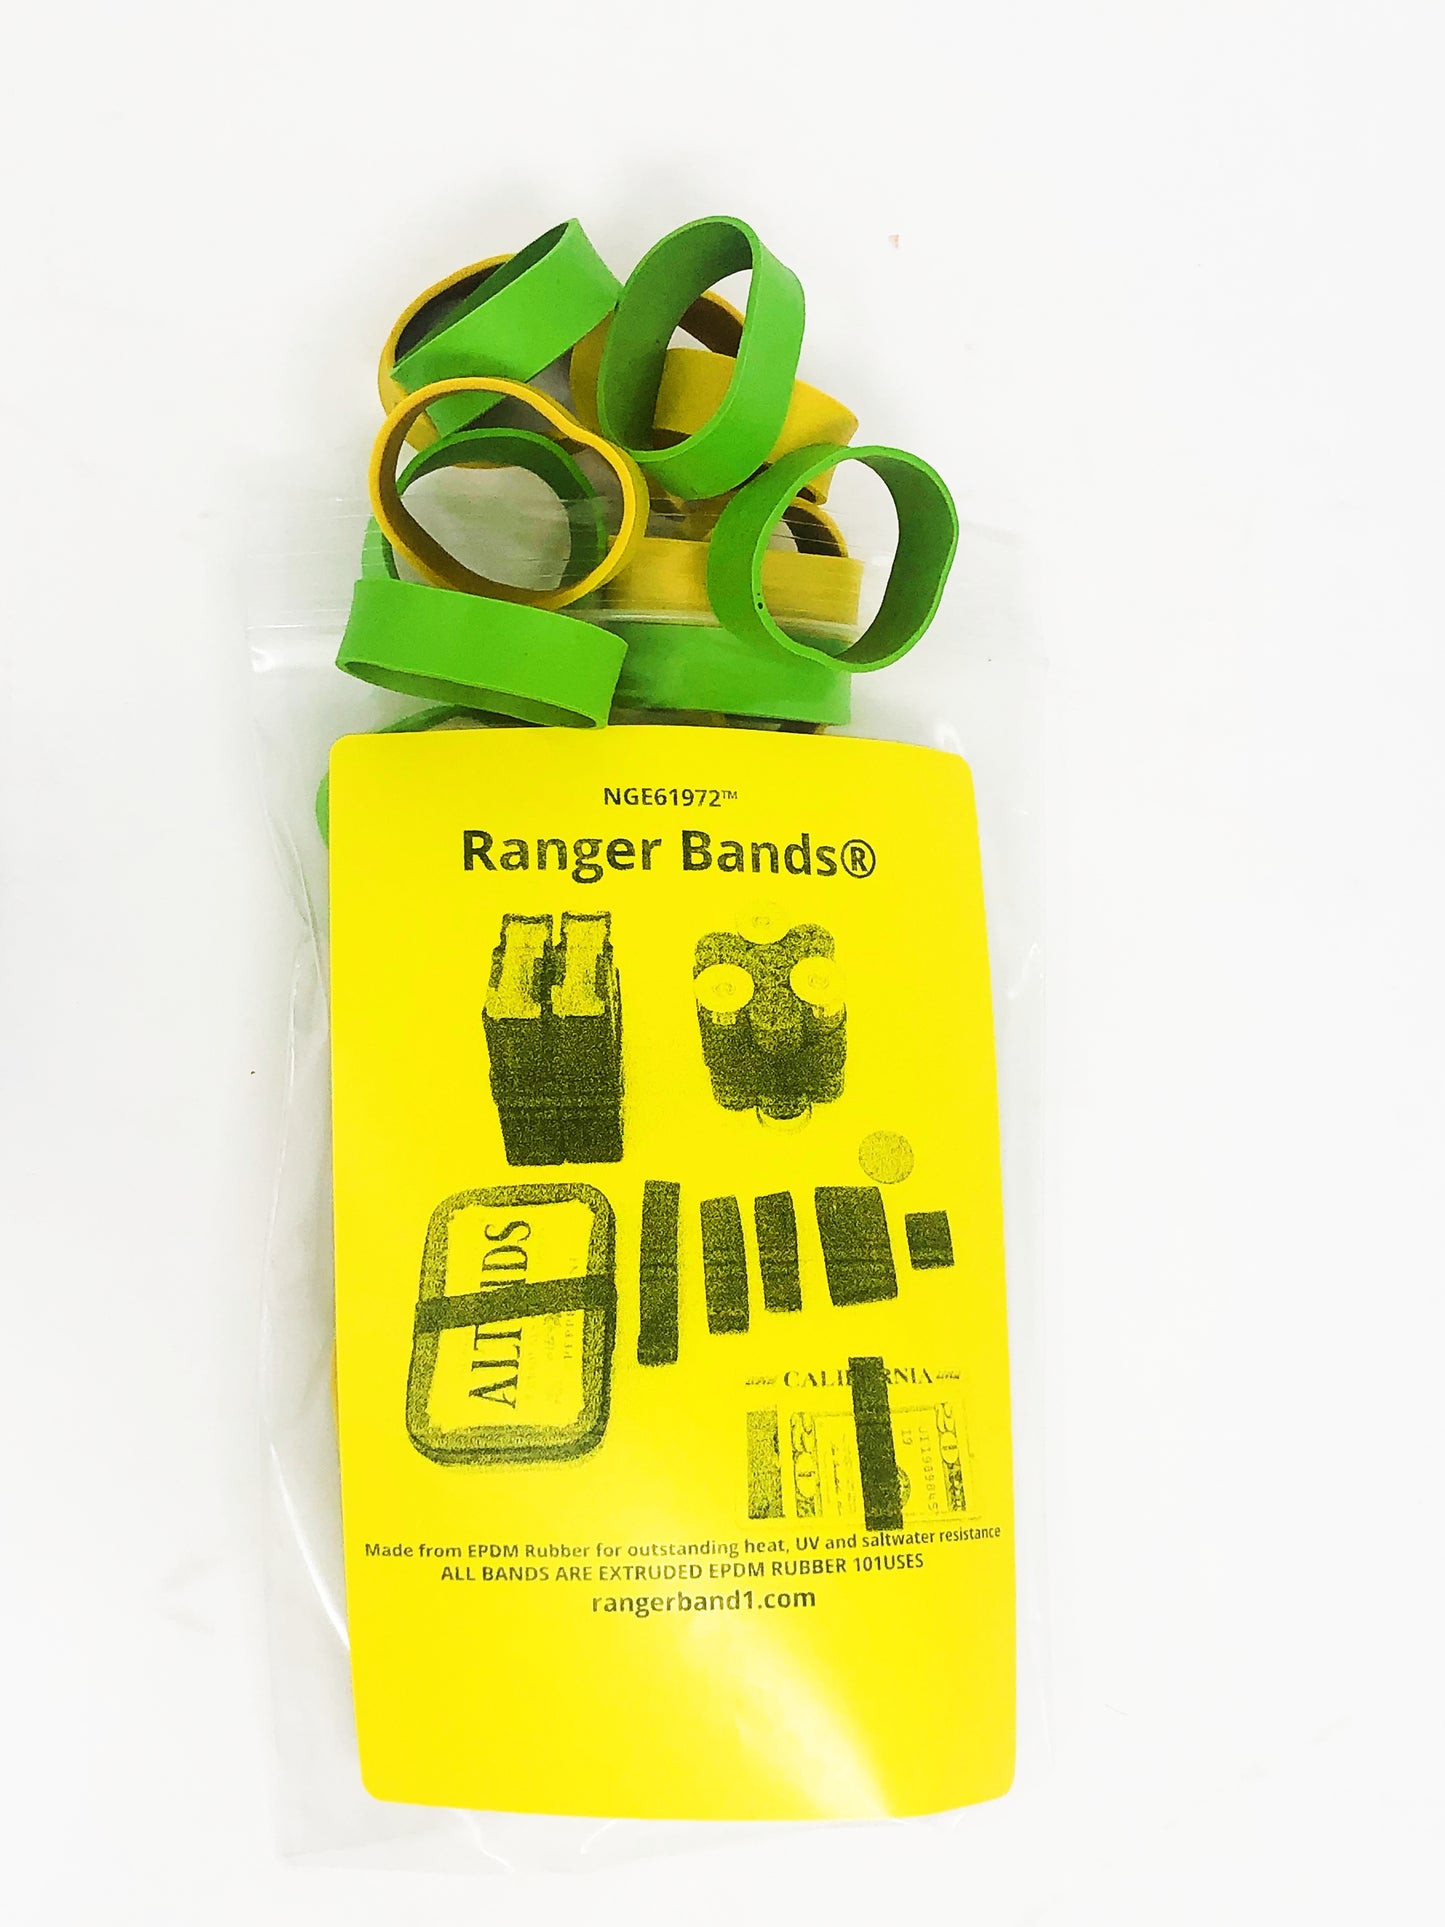 Ranger Bands® Mixed 24 Extra Stretch Safety colors small Made from EPDM Rubber for Survival, Emergency Tinder and Strapping Gear Made in the USA